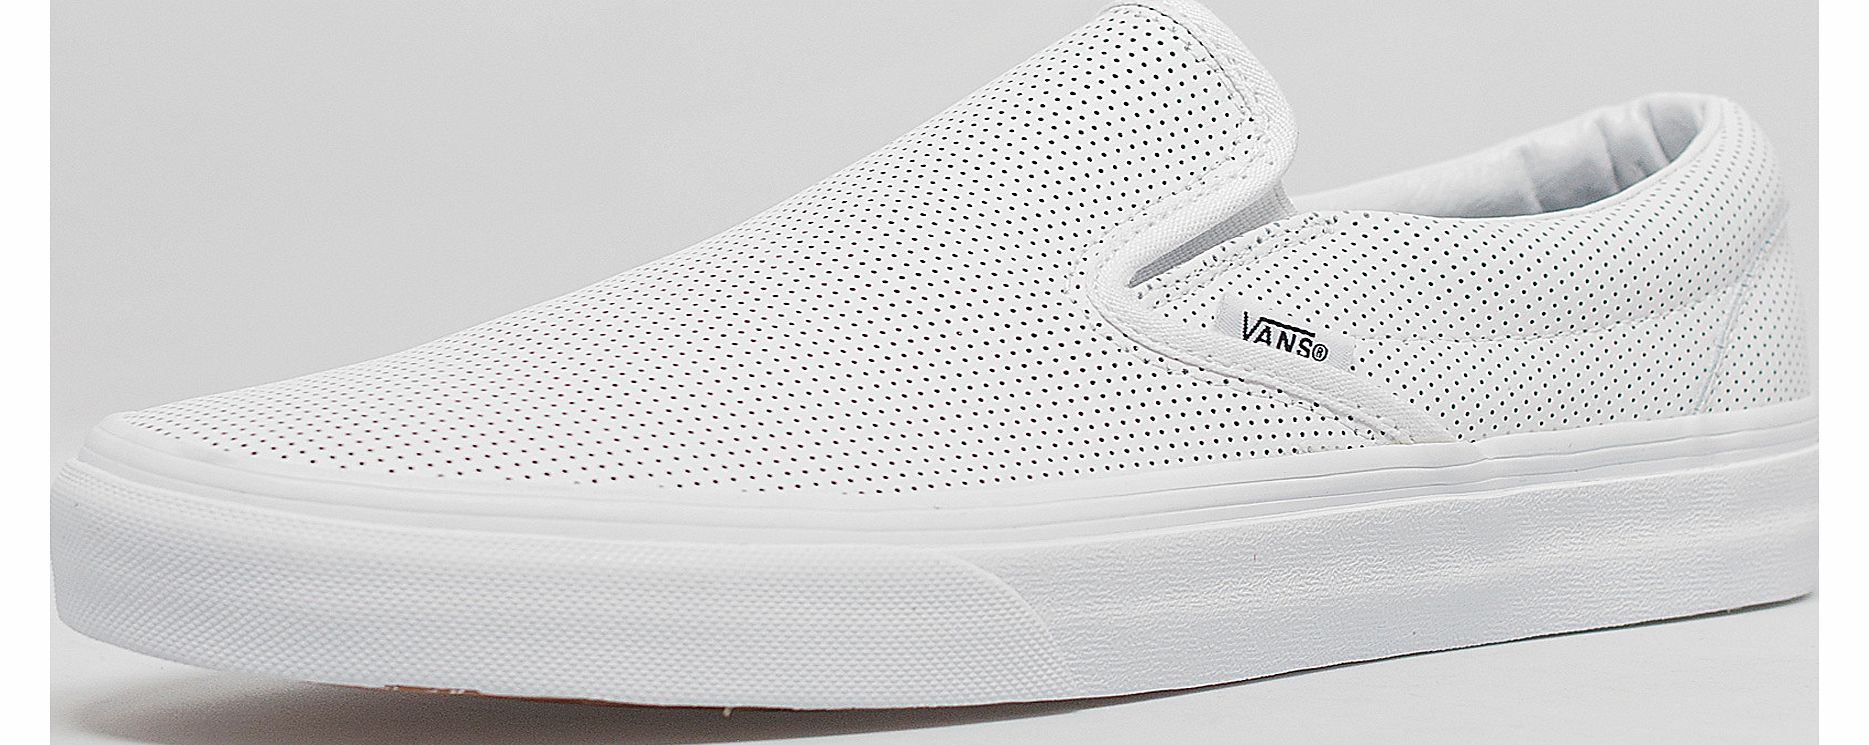 Vans Classic Slip On Perforated Leather